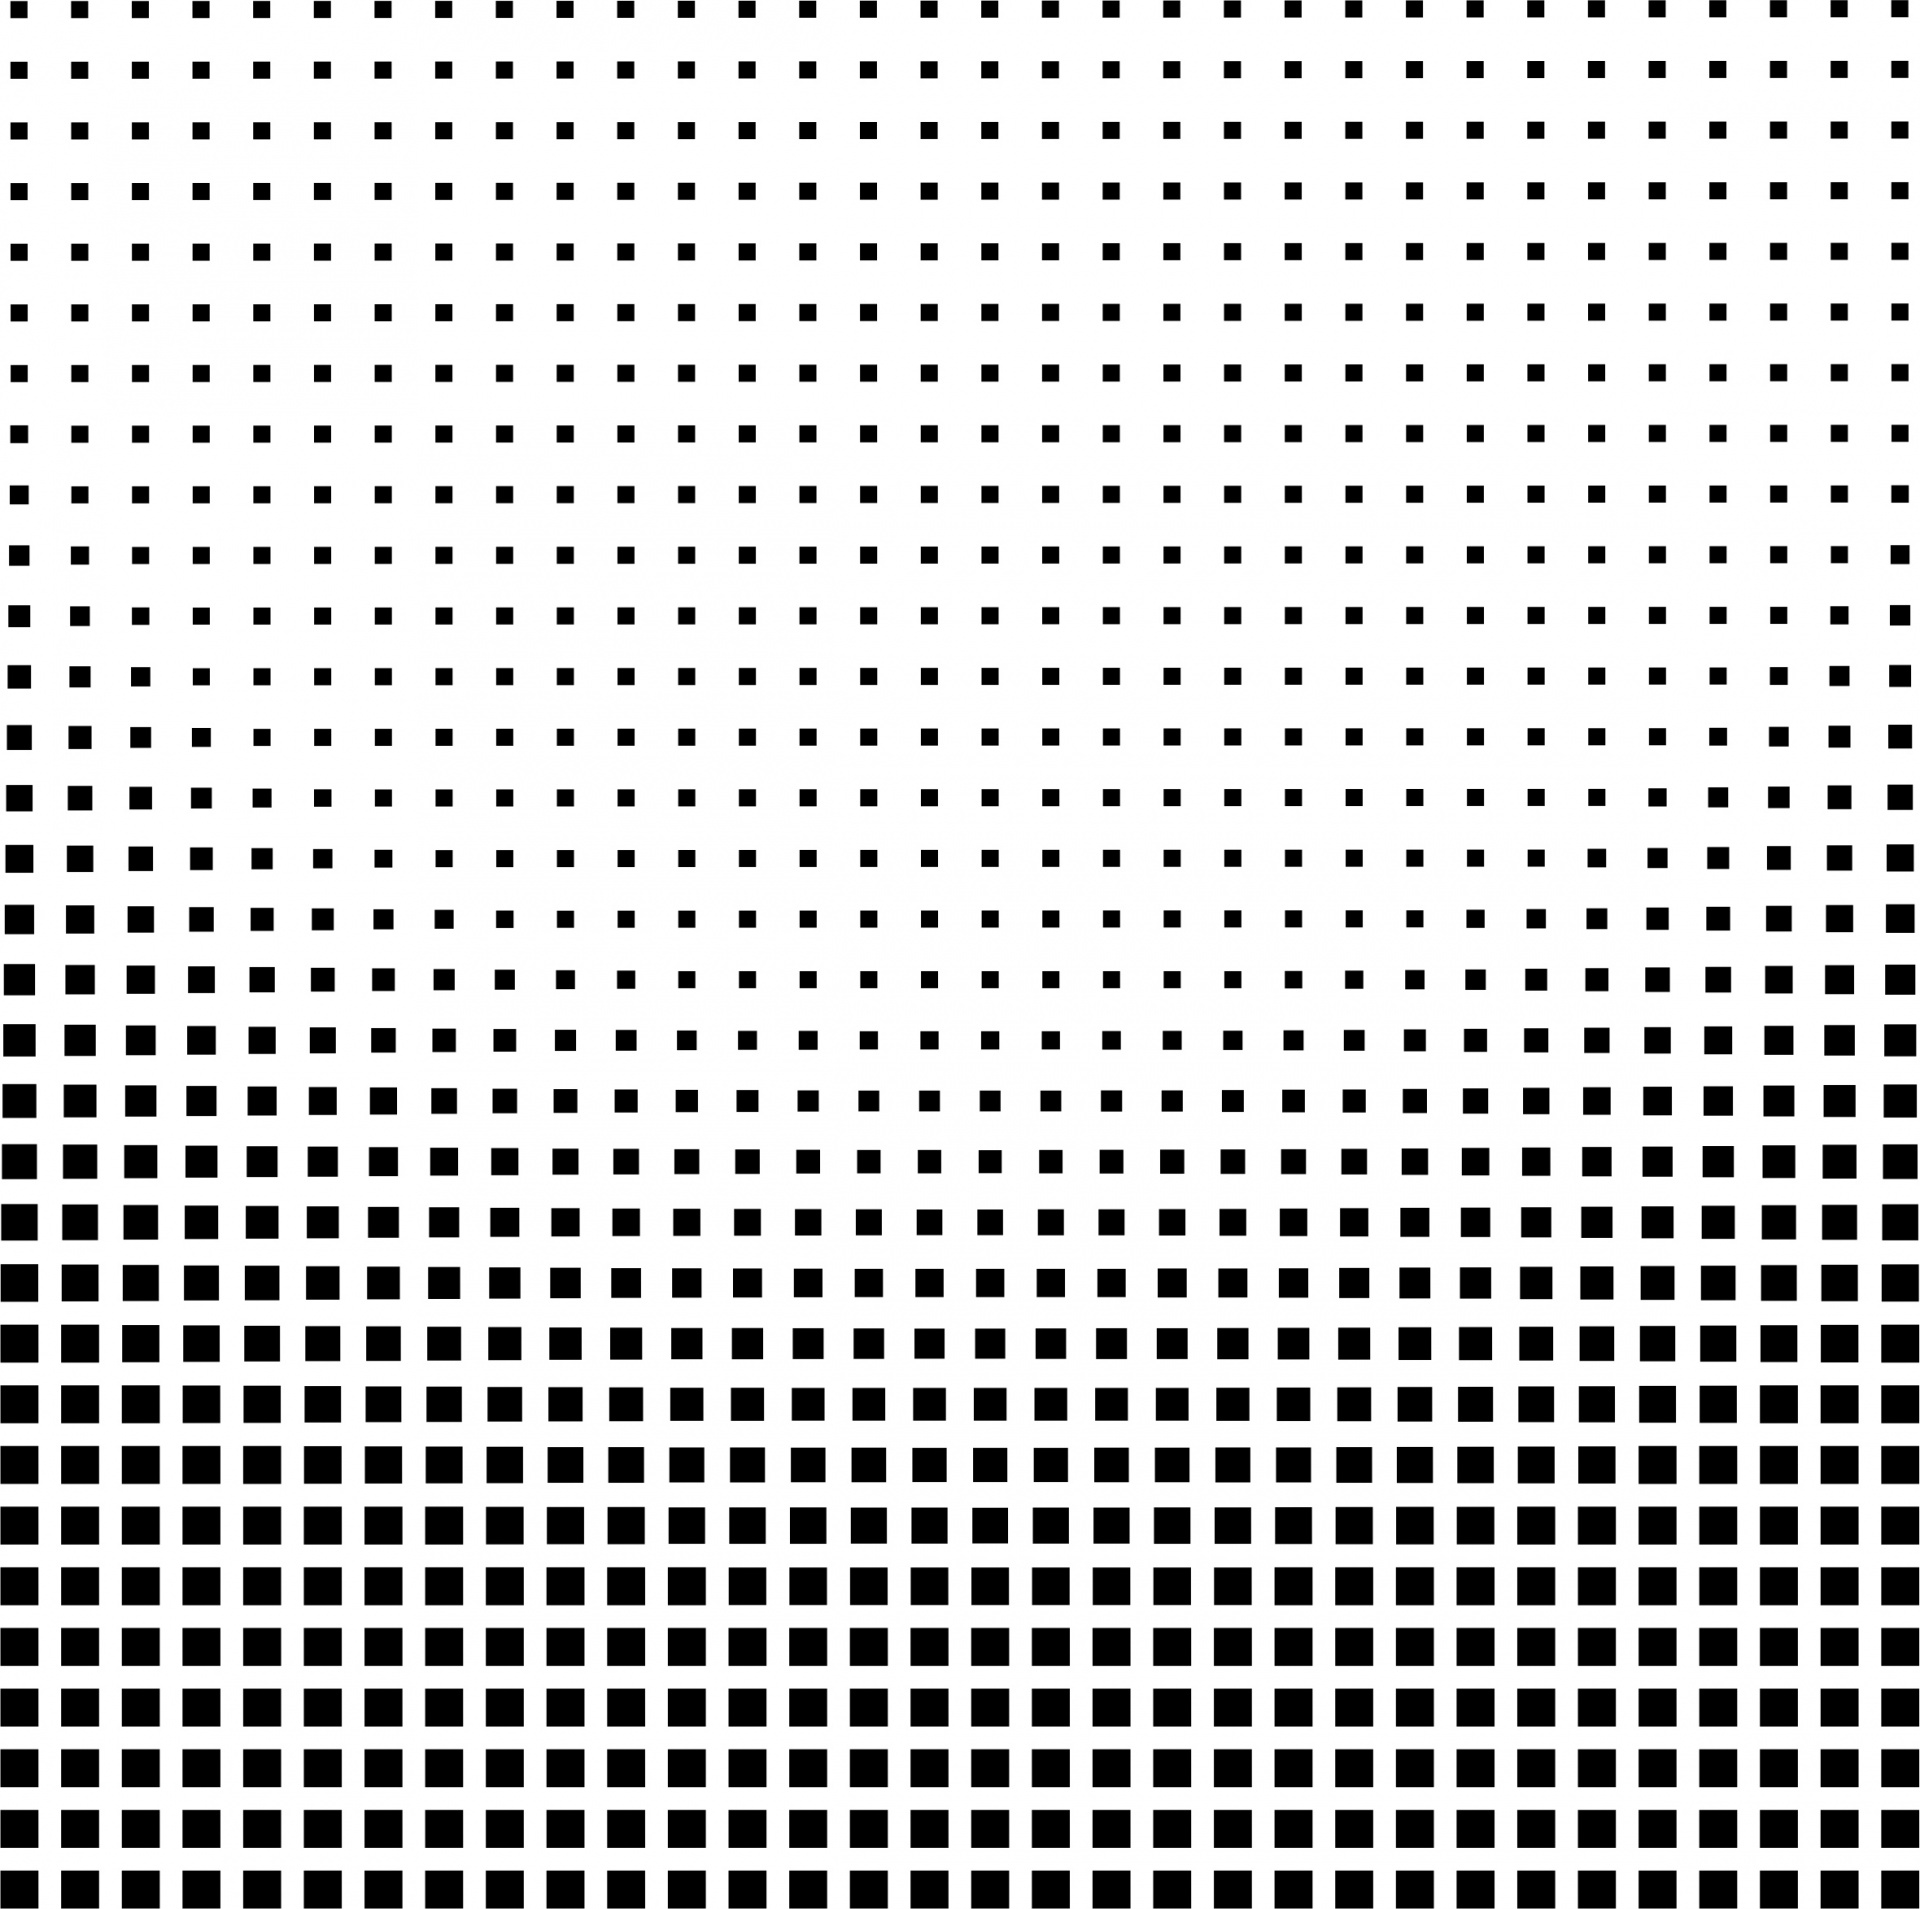 Pattern Texture Dots Design Surface Free Image From Needpix Com